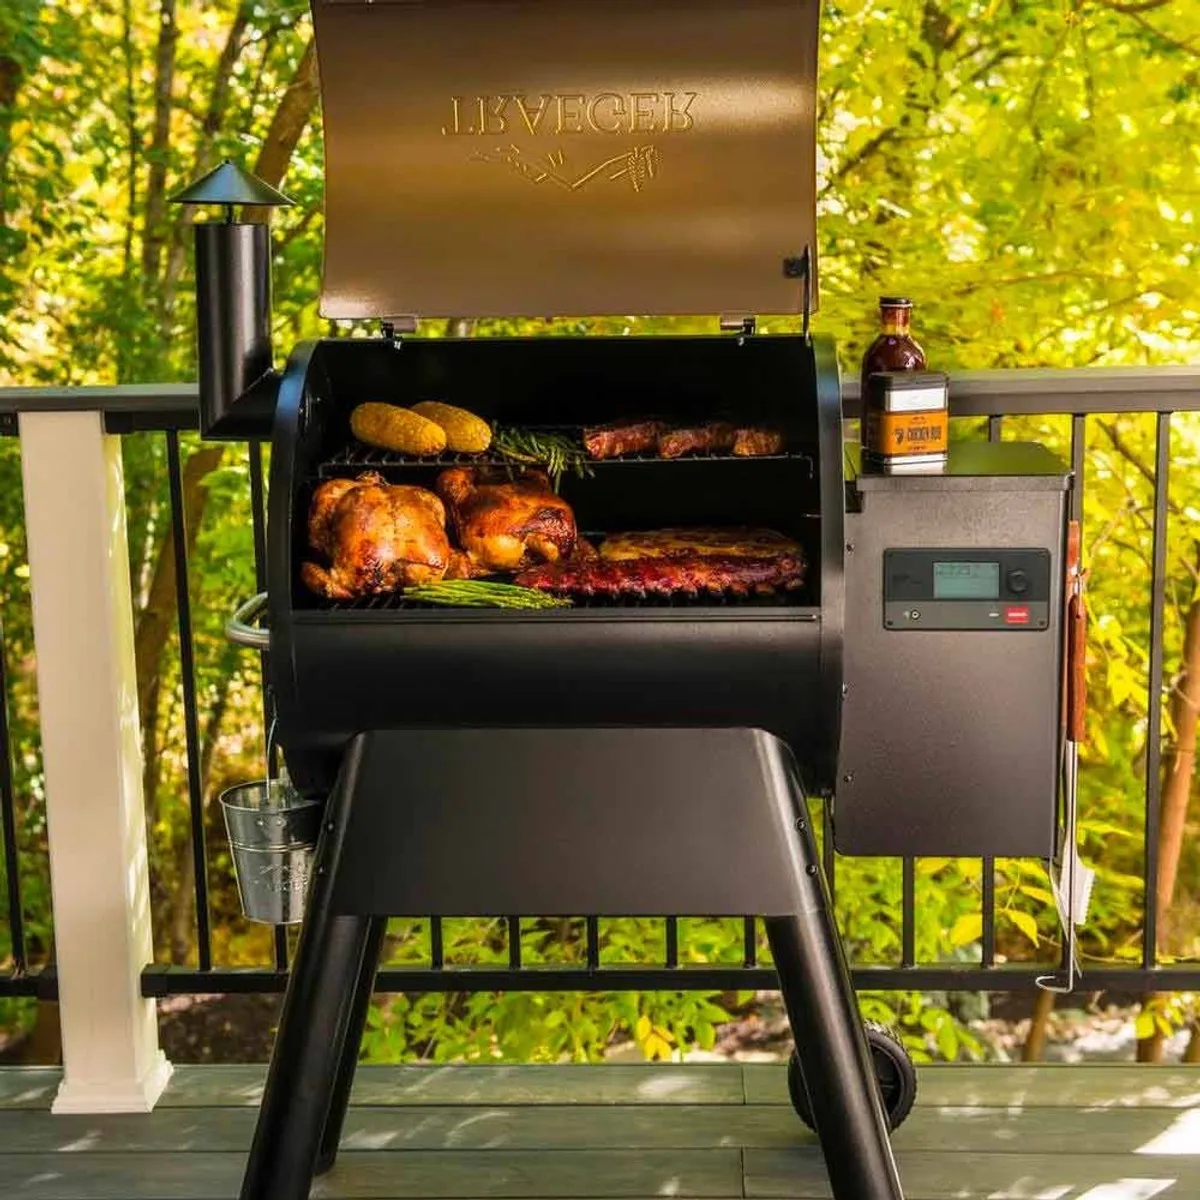 Inside the Traeger Pro Series 575